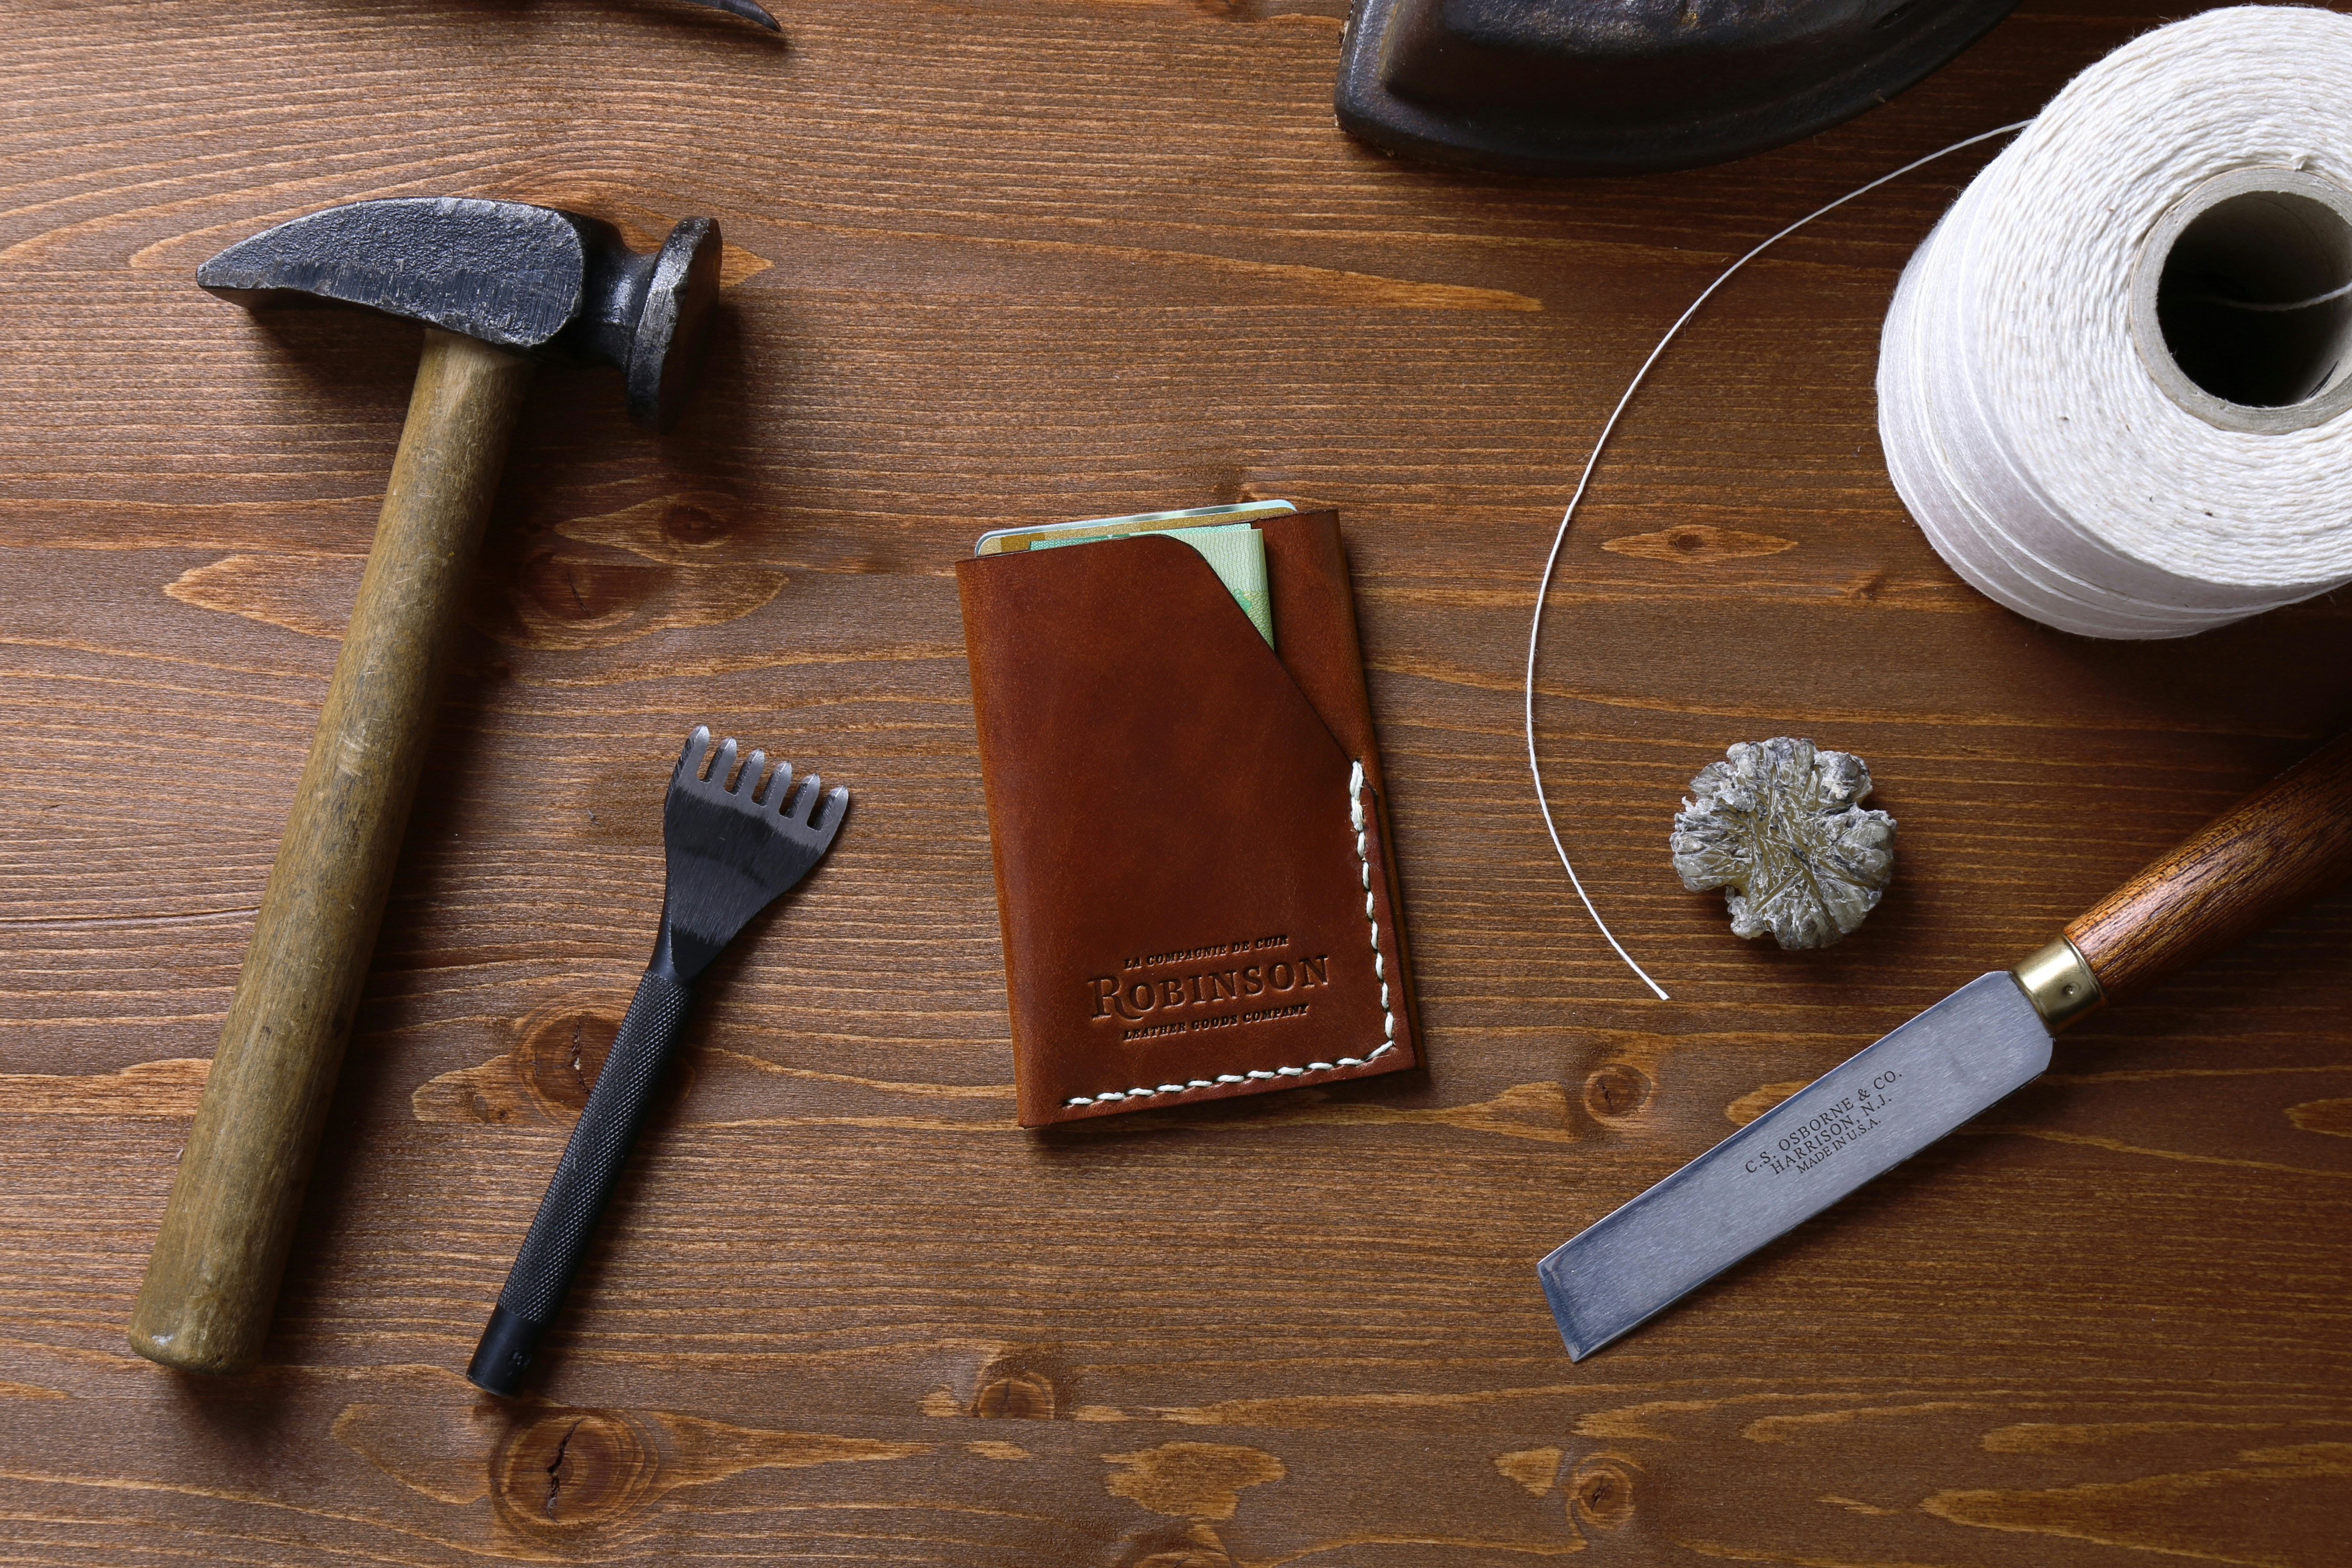 This slim wallet is for the every day life, biker, minimalist or hikers.\r
\r
Robinson Company is a family-owned business where we handcraft small batches of leather goods.